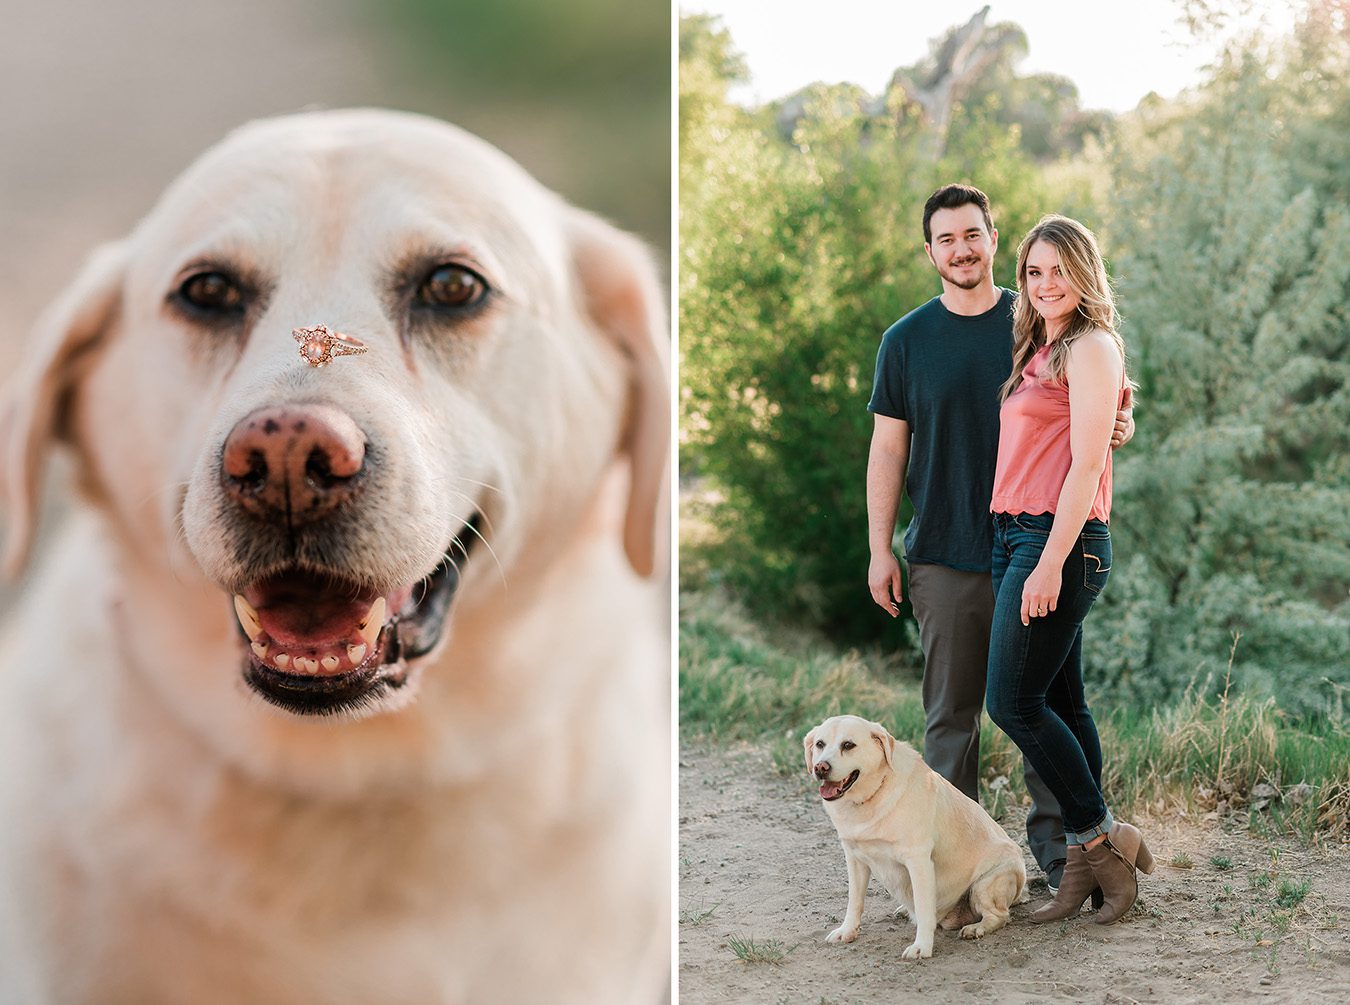 Caitlin & Drew | Spring Grand Junction Engagement Photos